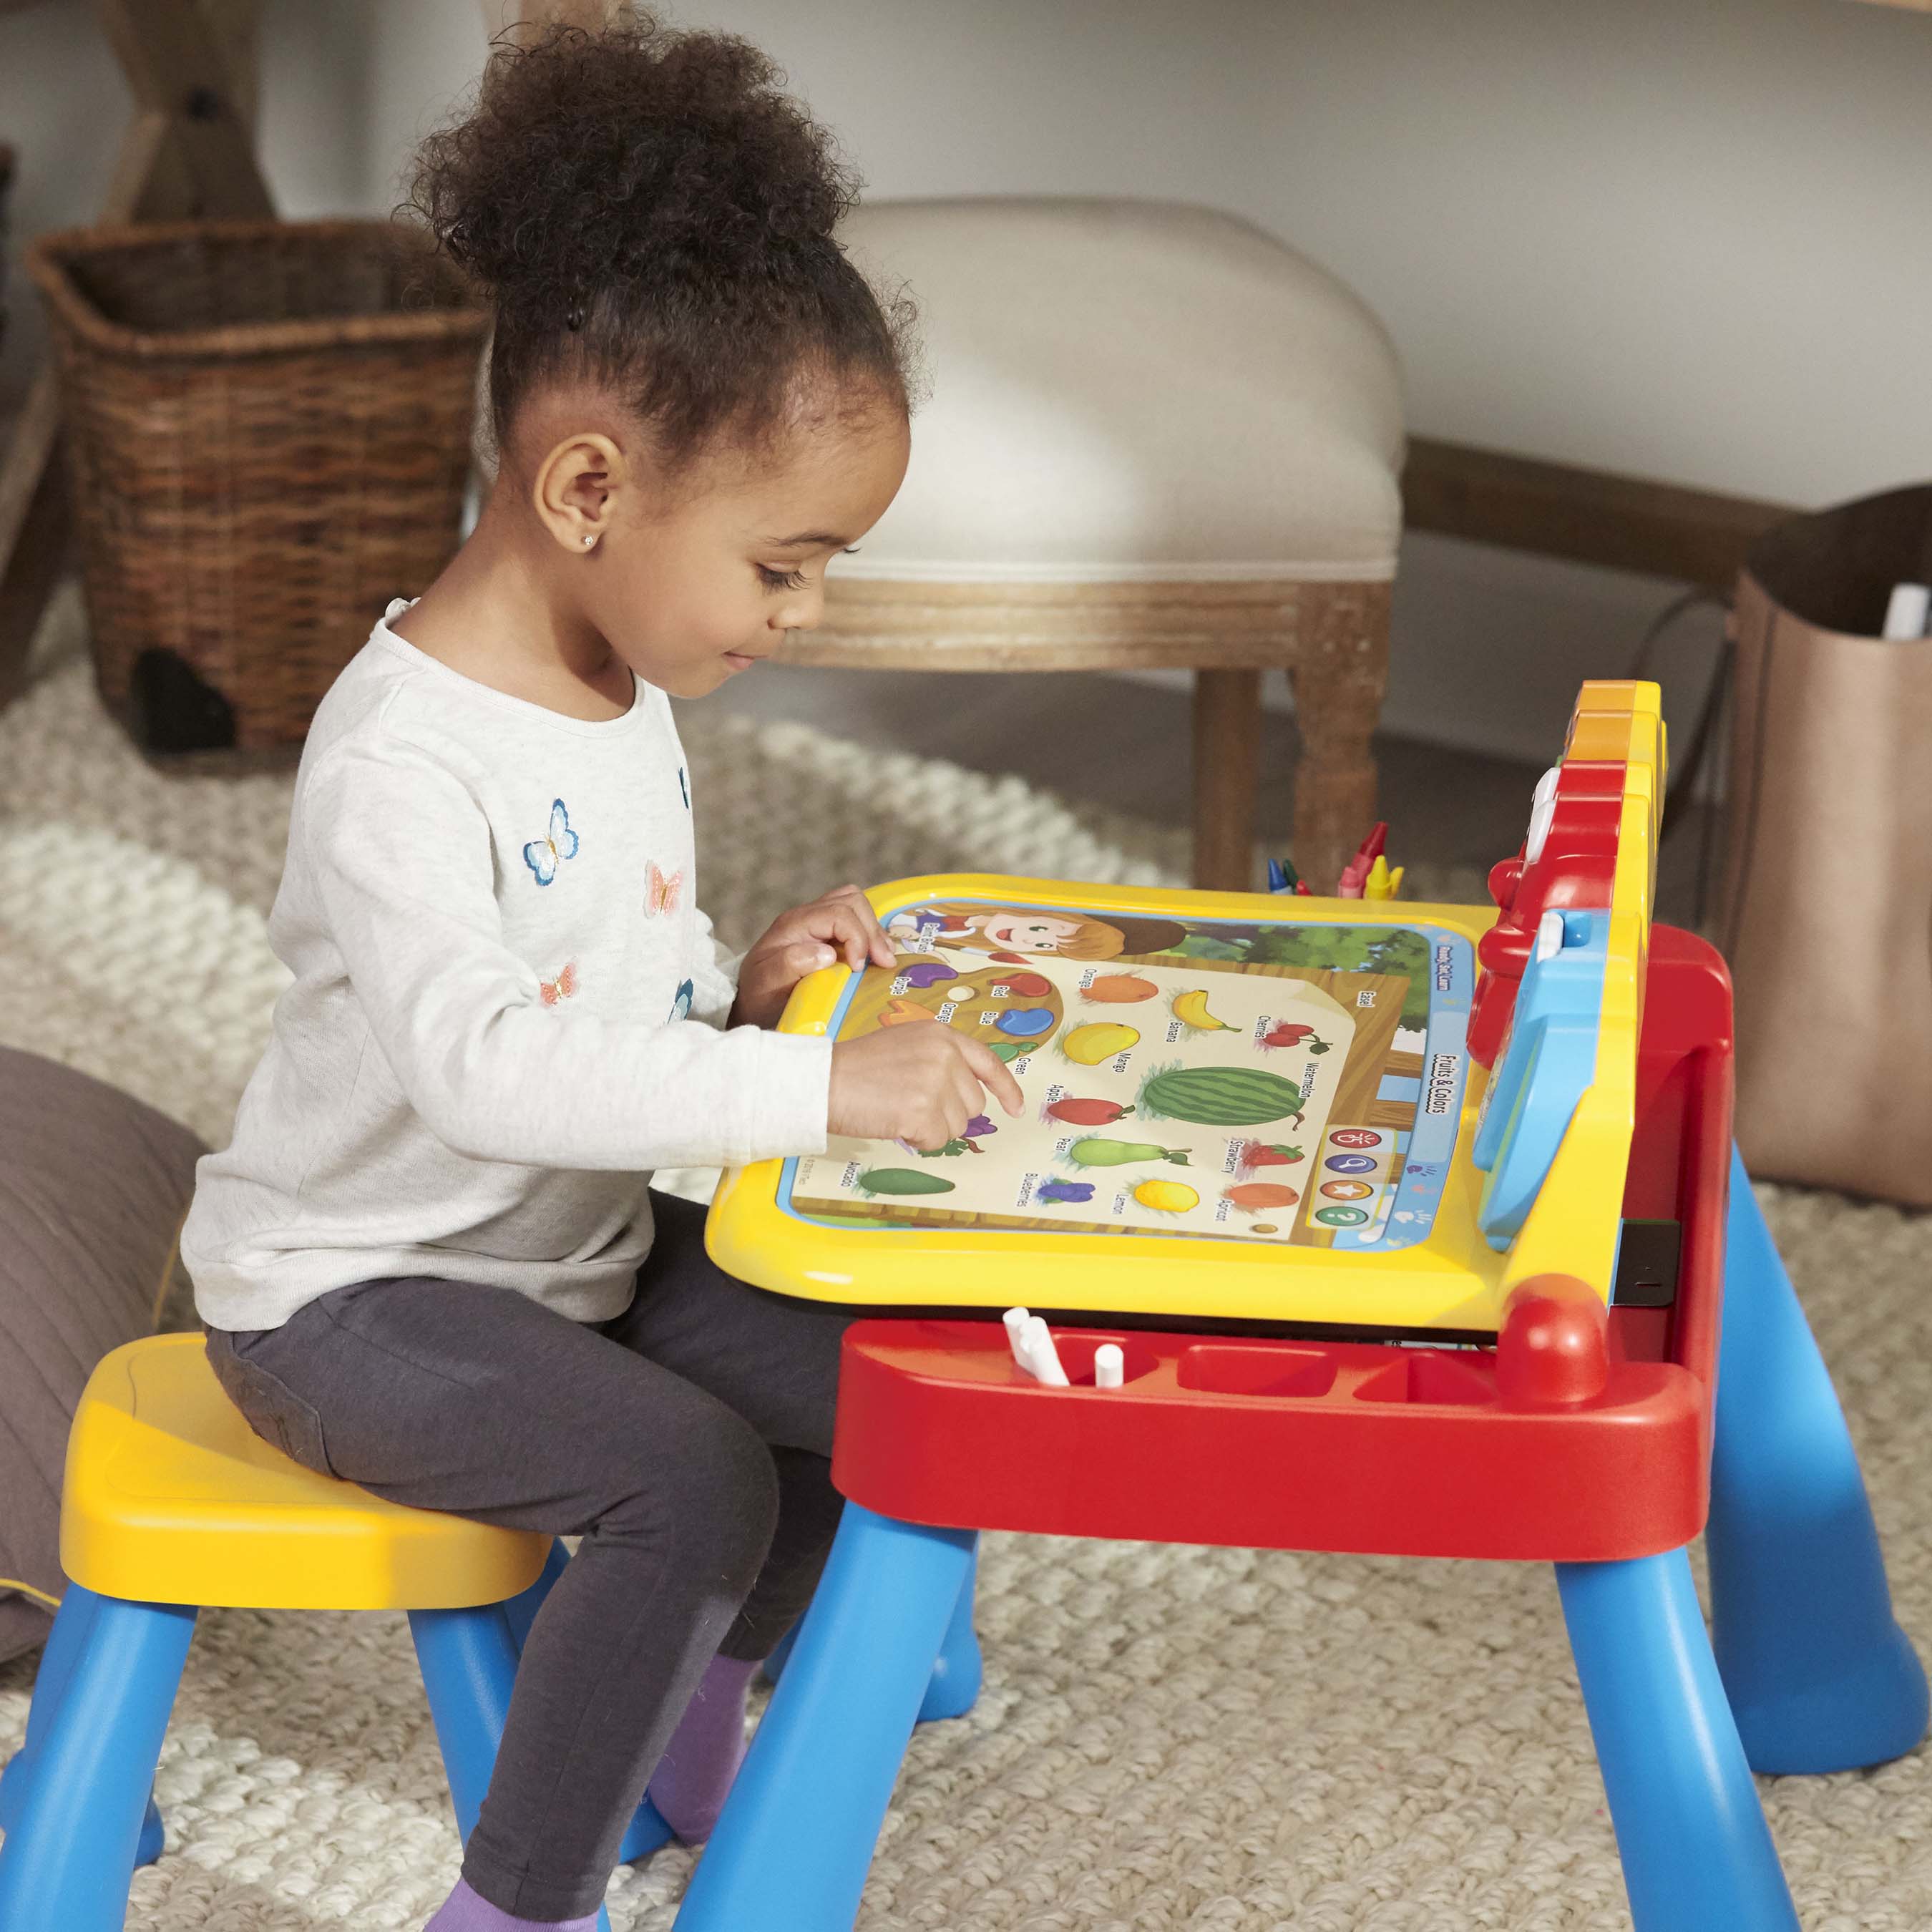 https://www.multivu.com/players/English/7845351-vtech-touch-and-learn-activity-desk-deluxe/image/vtech%C2%AE-touch-learn-activity-desktm-deluxe-7-HR.jpg